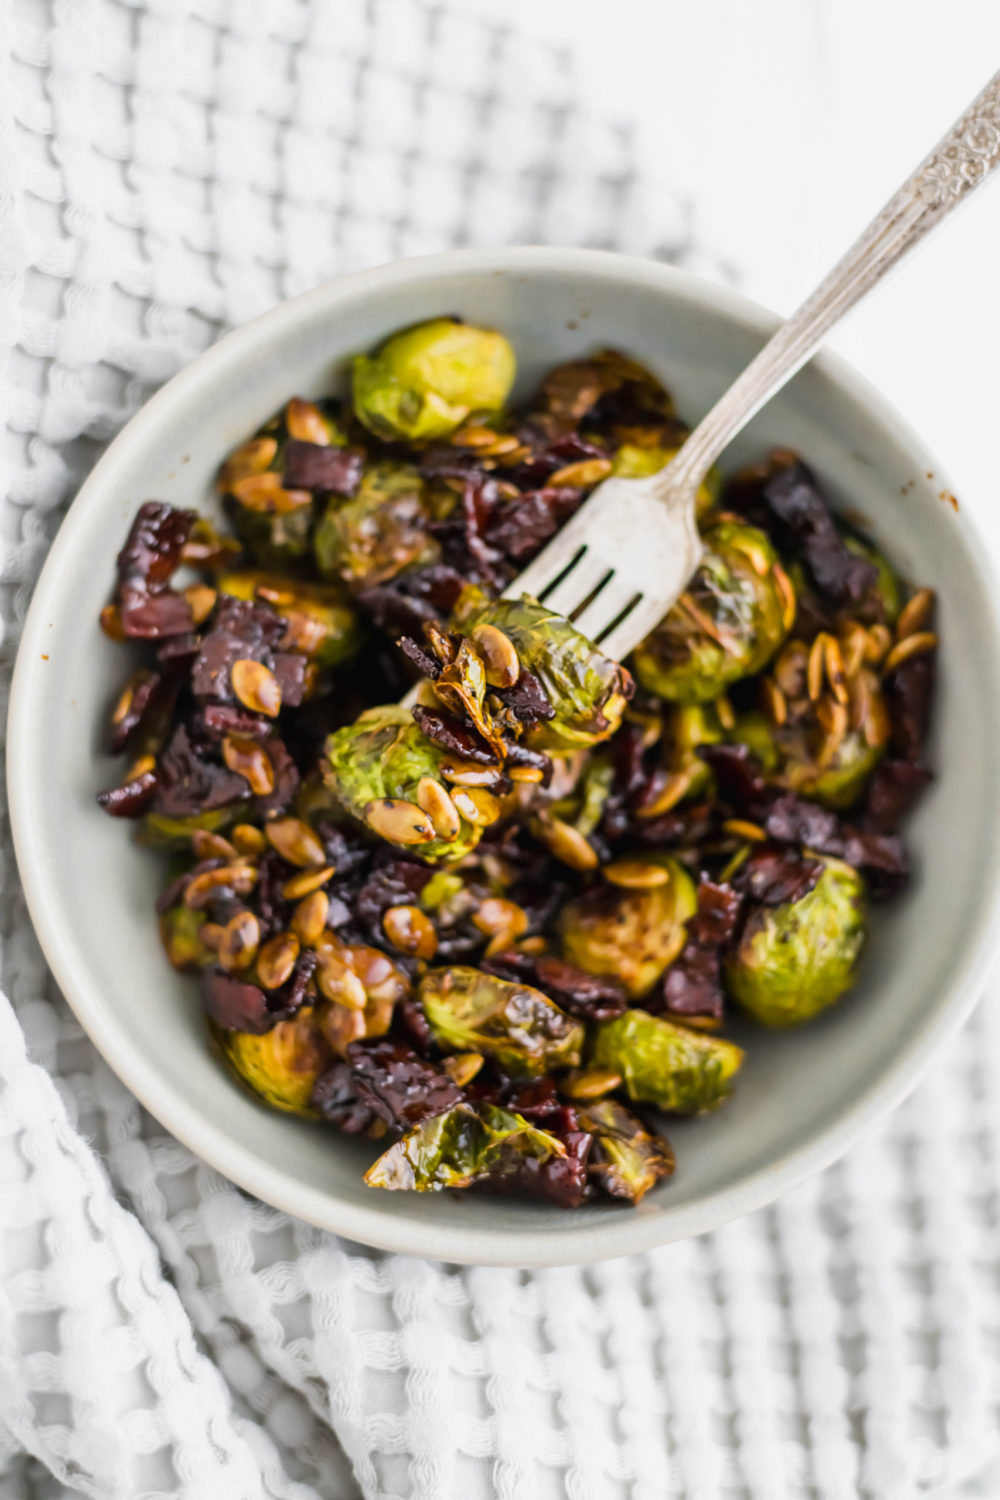 Honey Balsamic Brussels Sprouts are roasted perfectly in the oven then drizzled with the tastiest sweet and savory sauce. Topped with crispy bacon and pumpkin seeds for the perfect crunch.